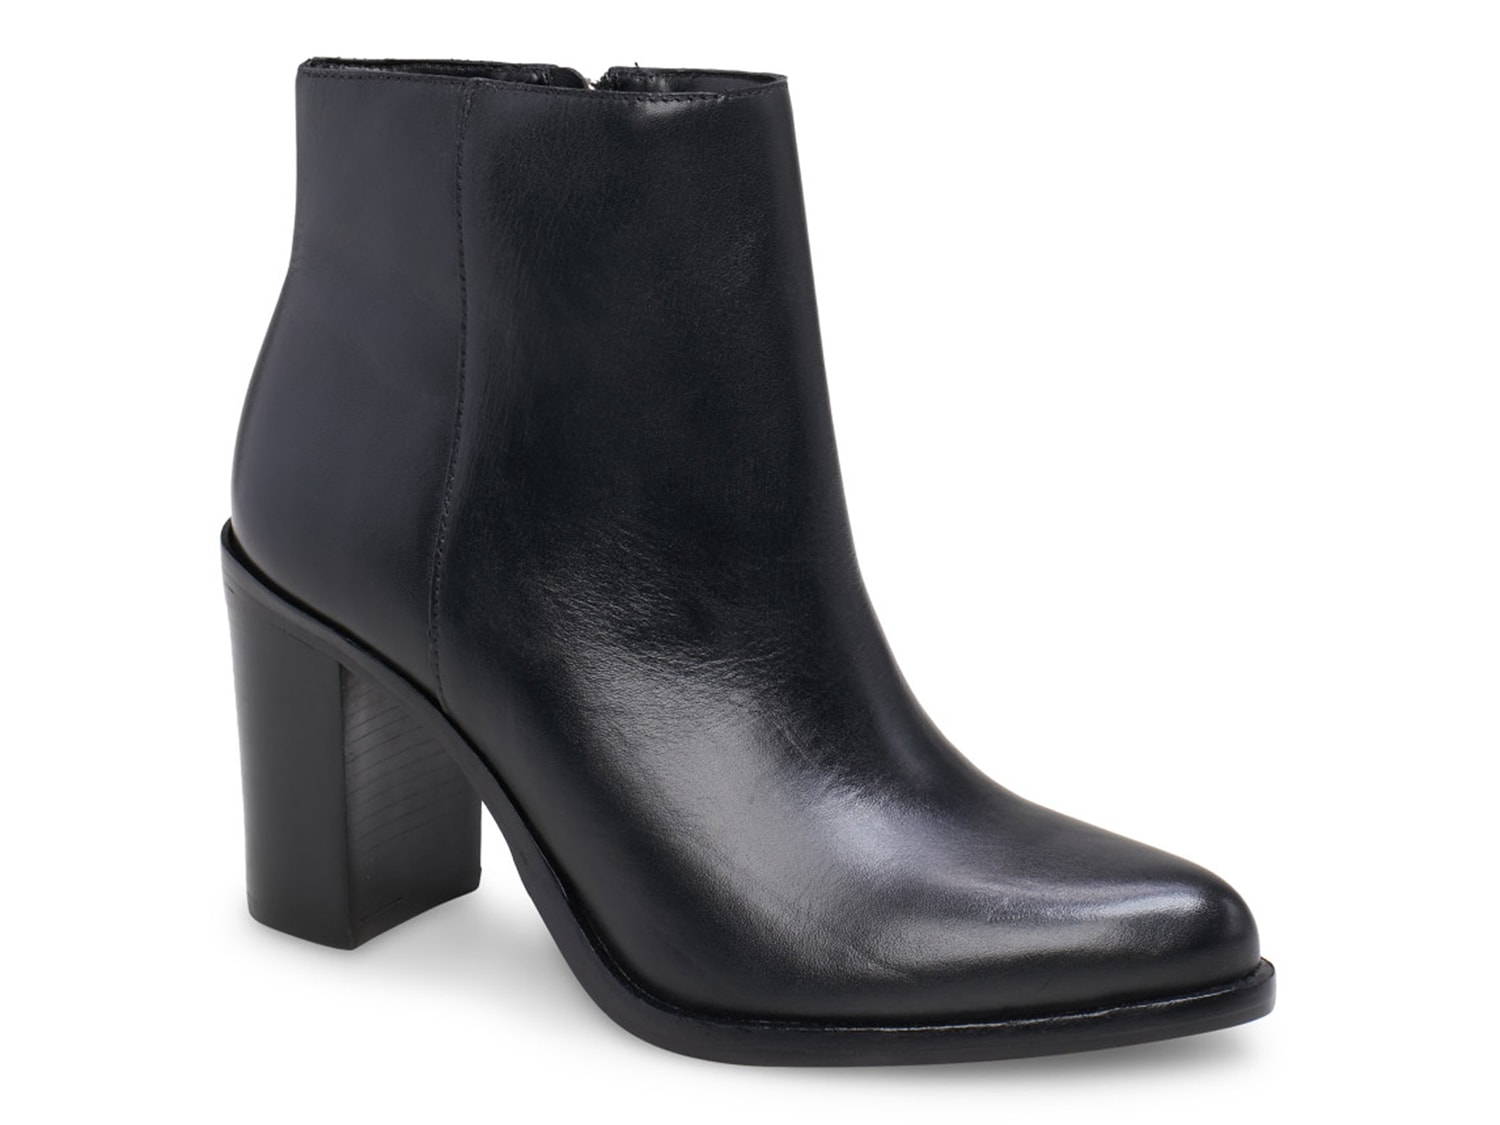 Vince Camuto Paitrilla Bootie - Free Shipping | DSW